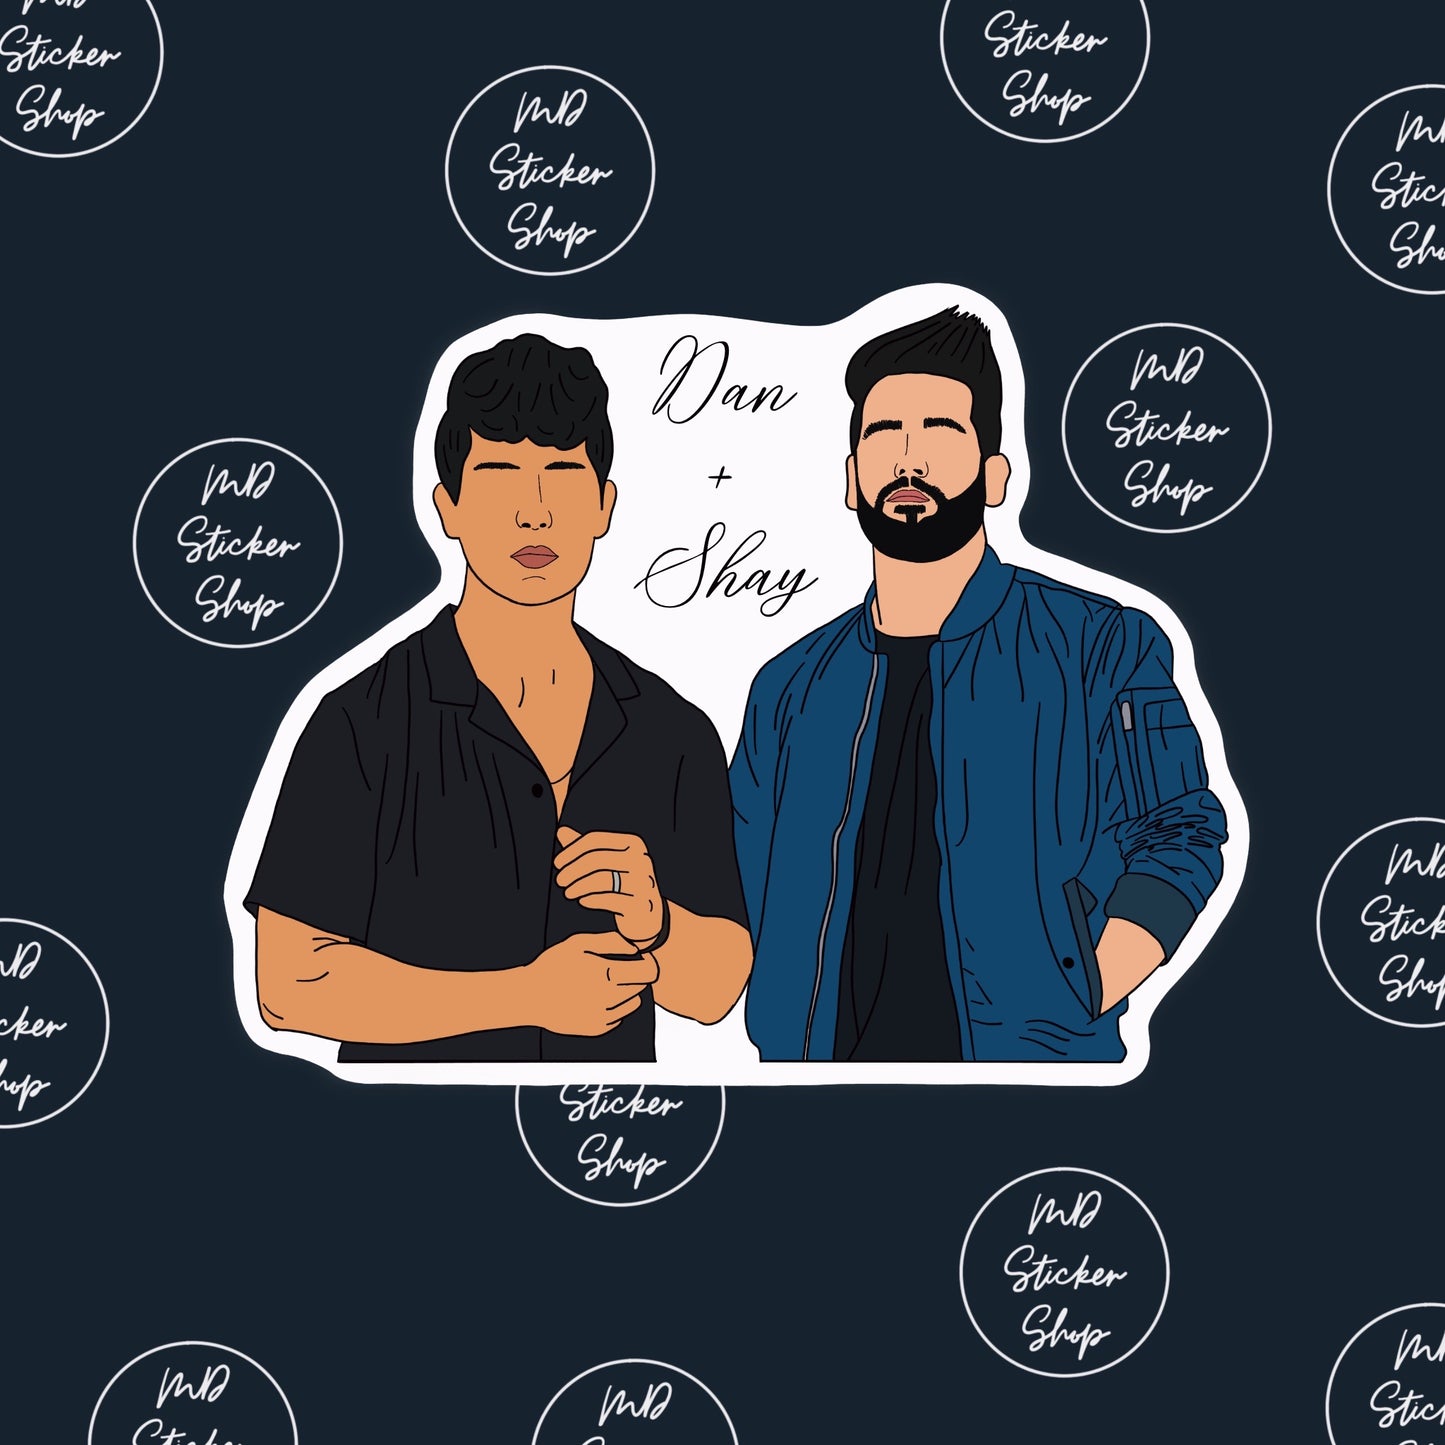 Dan and Shay Country Duo Silhouette Sticker